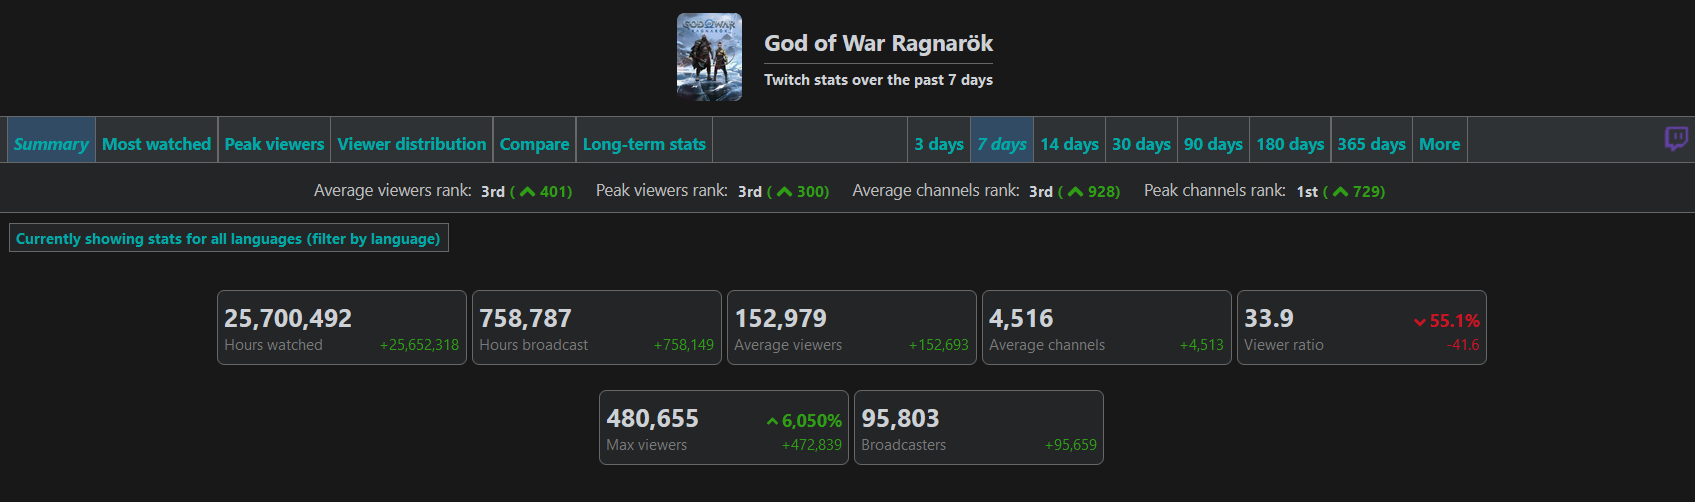 480 thousand viewers and 22 million hours of viewing: God of War Ragnarok statistics on Twitch shows fans' interest in the game-2